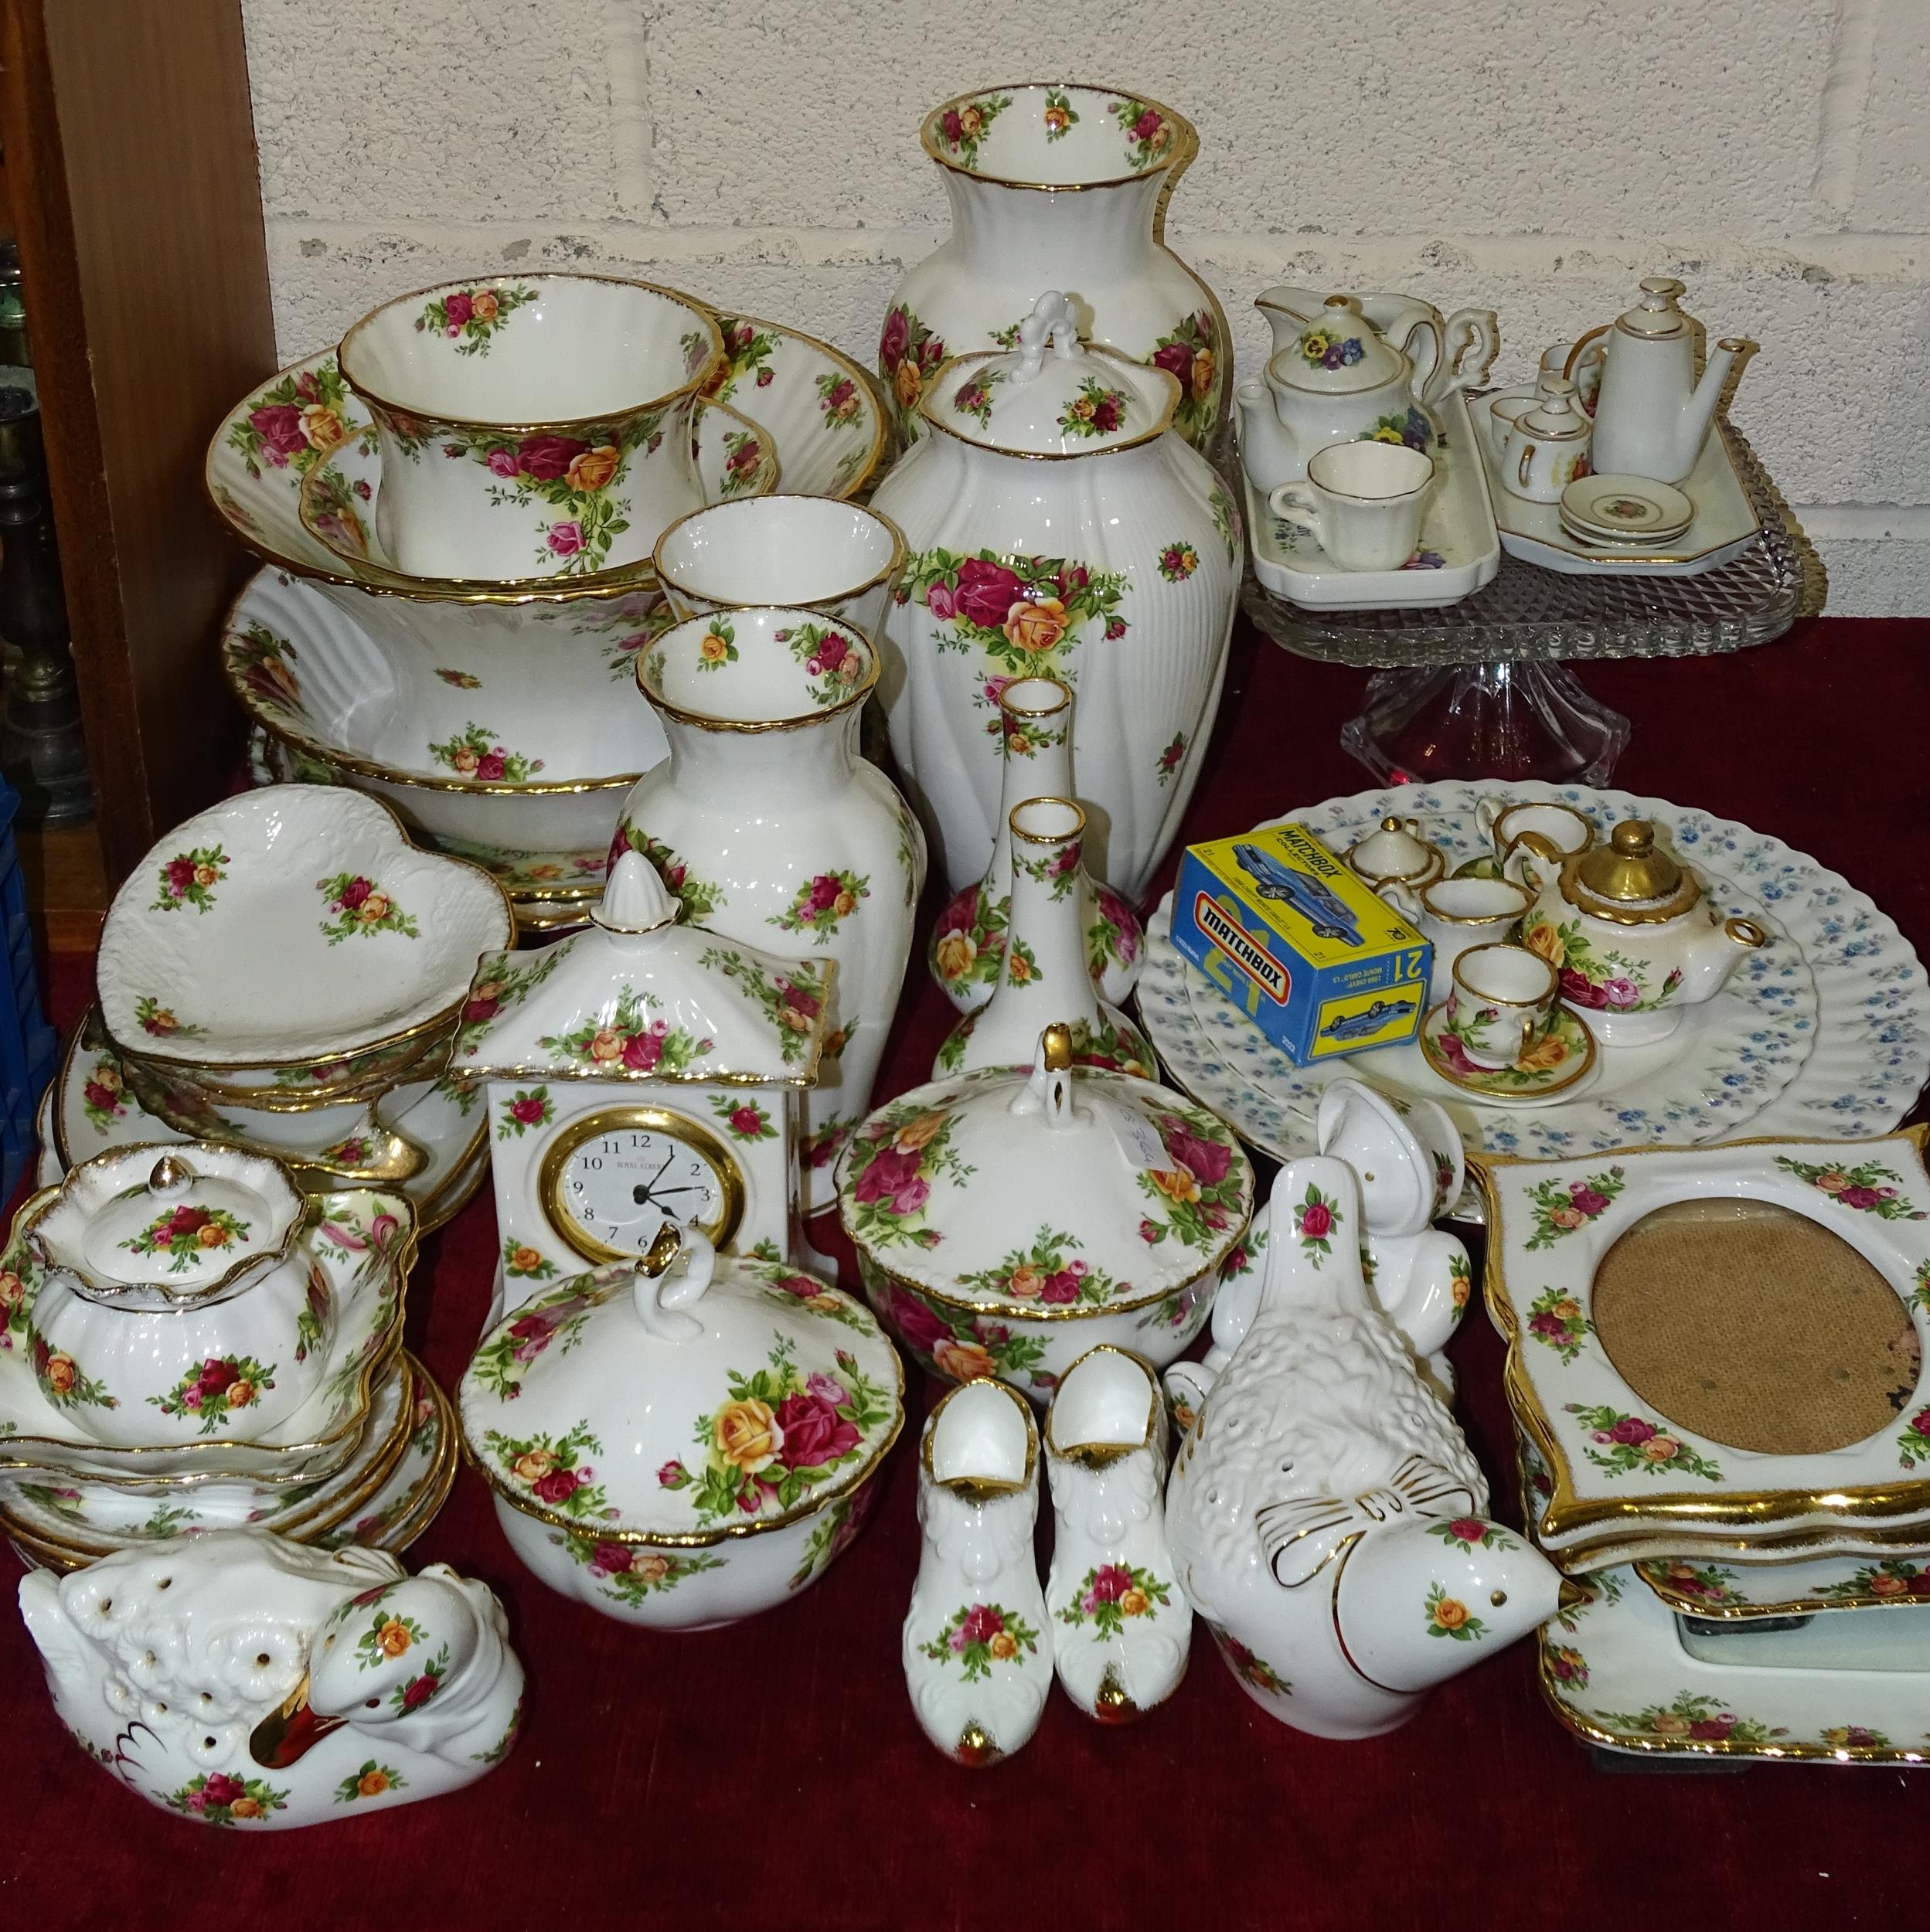 A collection of approximately forty pieces of Royal Albert "Old Country Roses" table ware